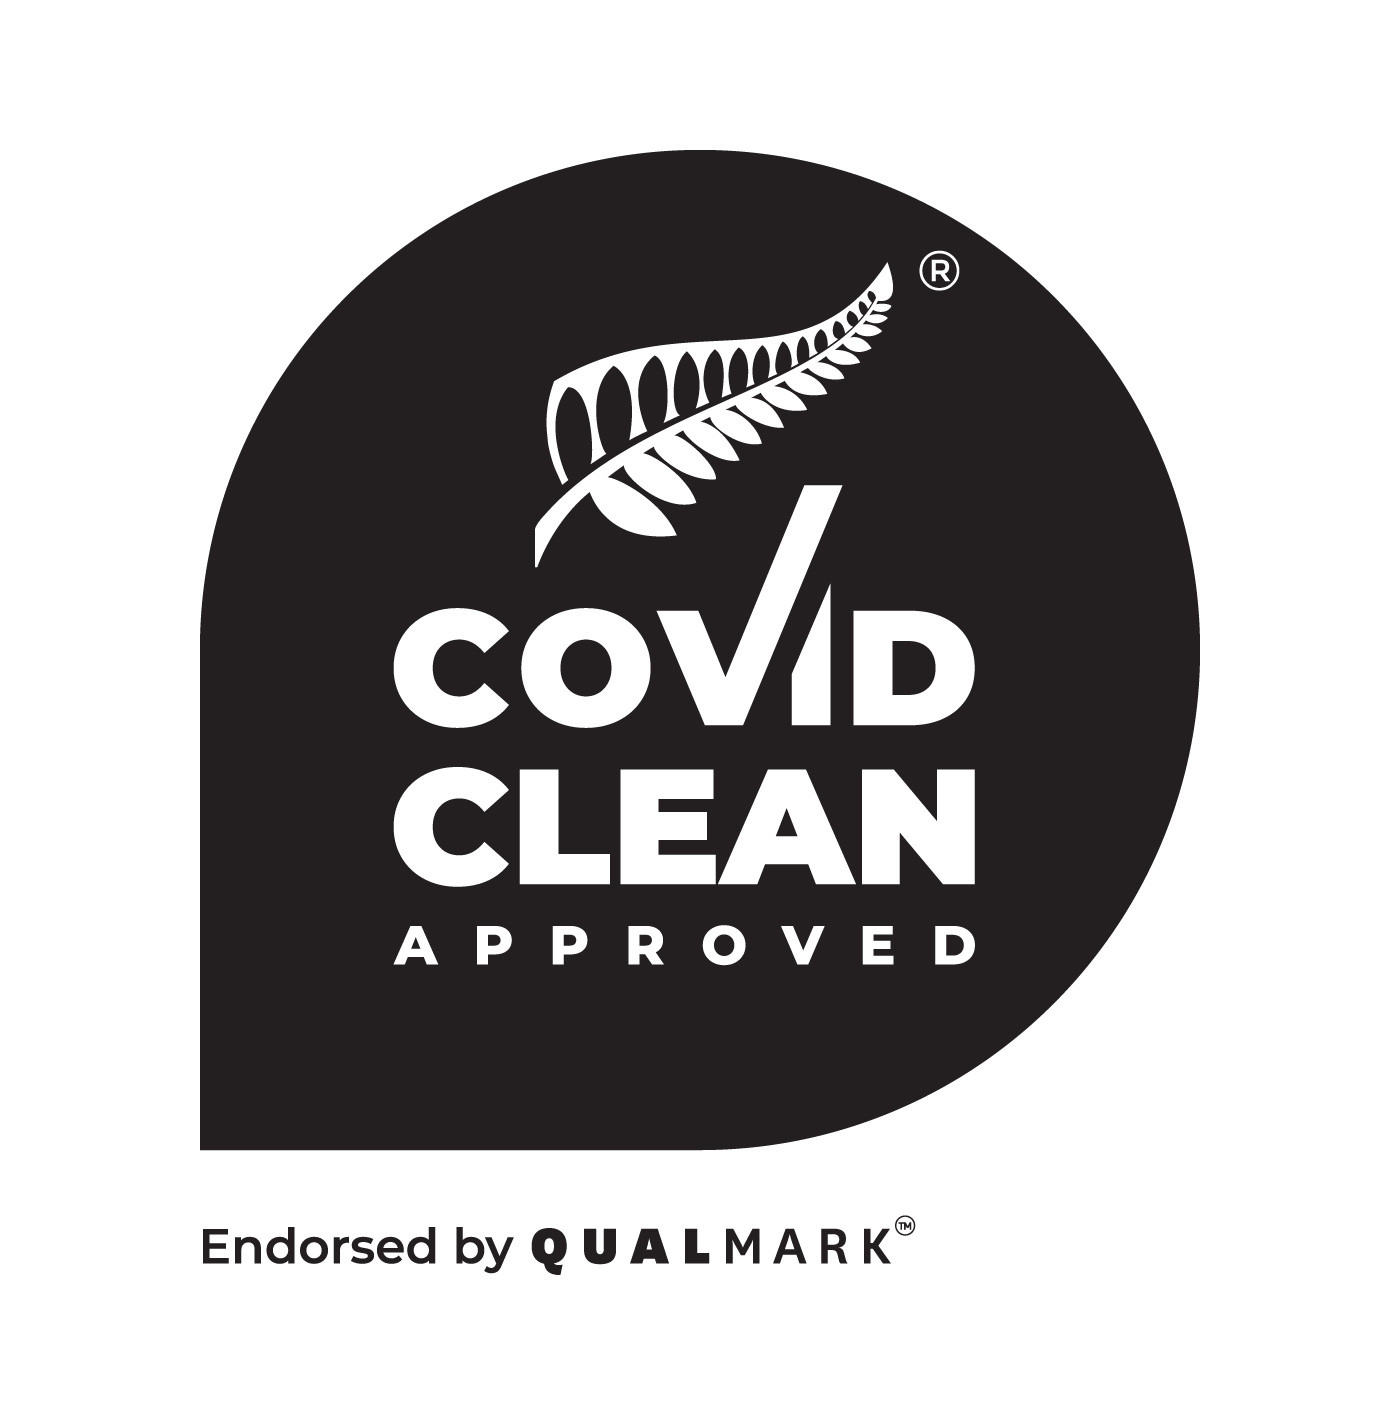 City Walks is Qualmark 'Covid Clean' approved. Click the link below to see what this means.